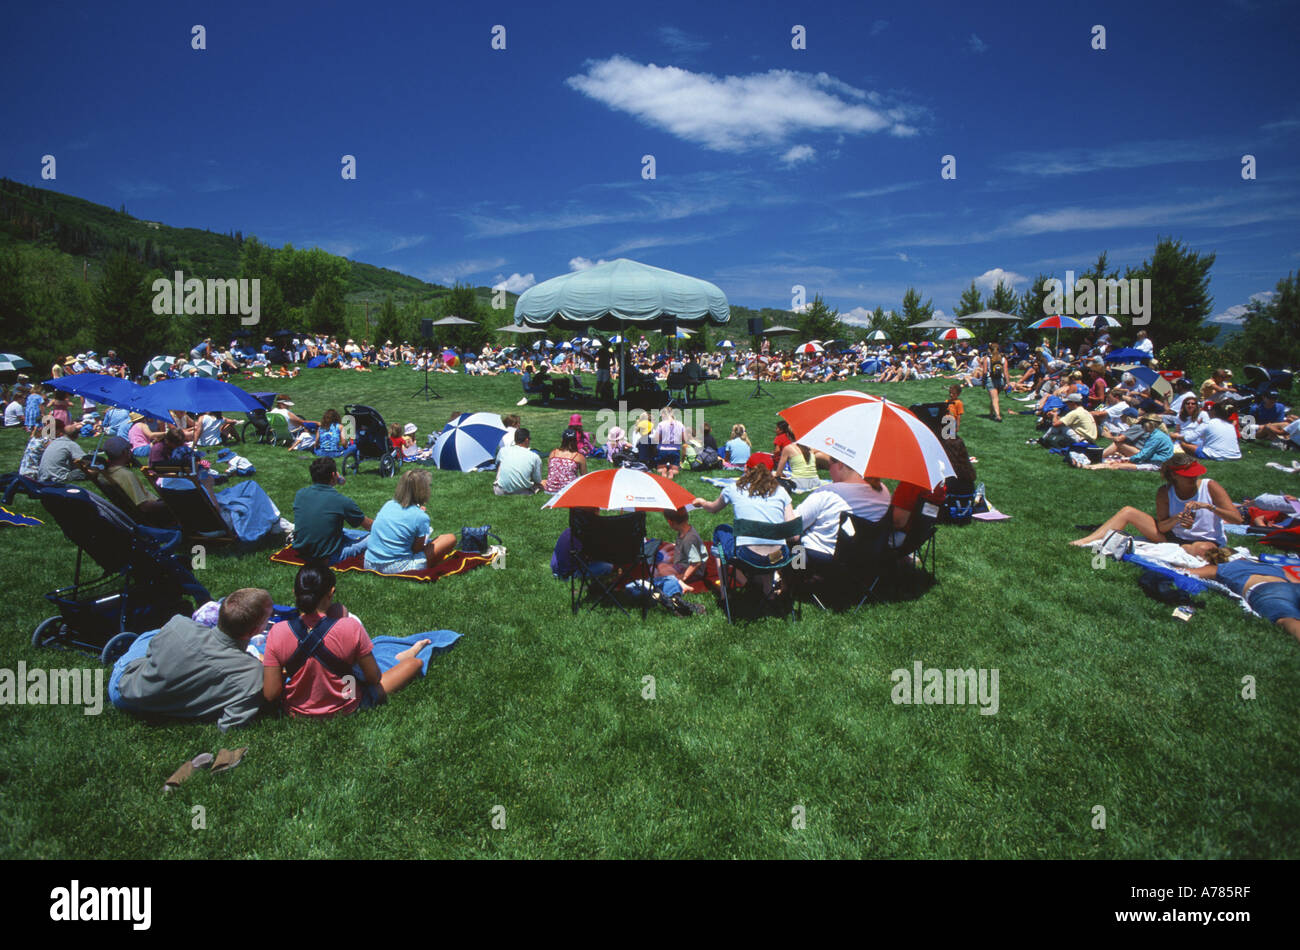 Crowd at outdoor concert Yampa river botanic park, Steamboat Springs, Colorado, USA. Stock Photo